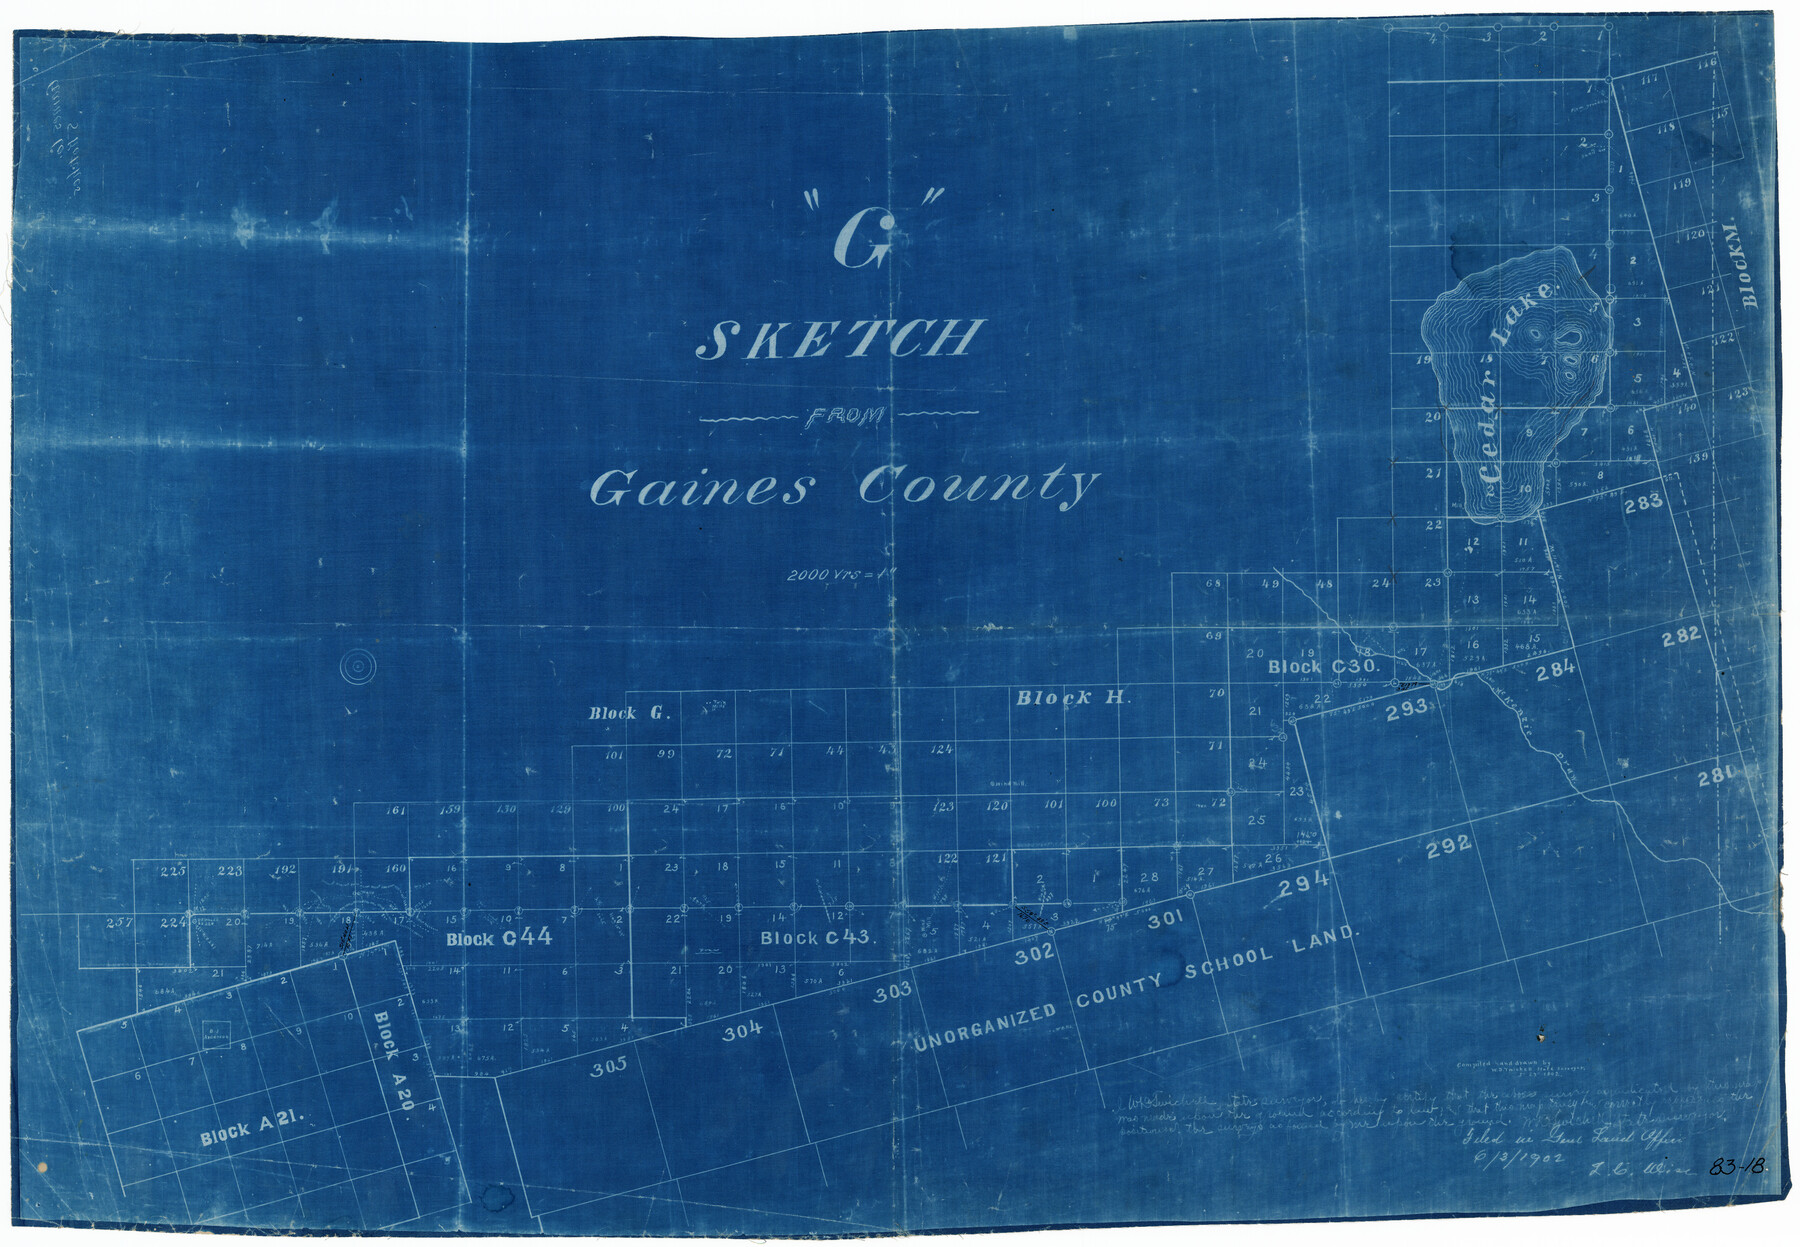 90839, "G" Sketch from Gaines County, Twichell Survey Records